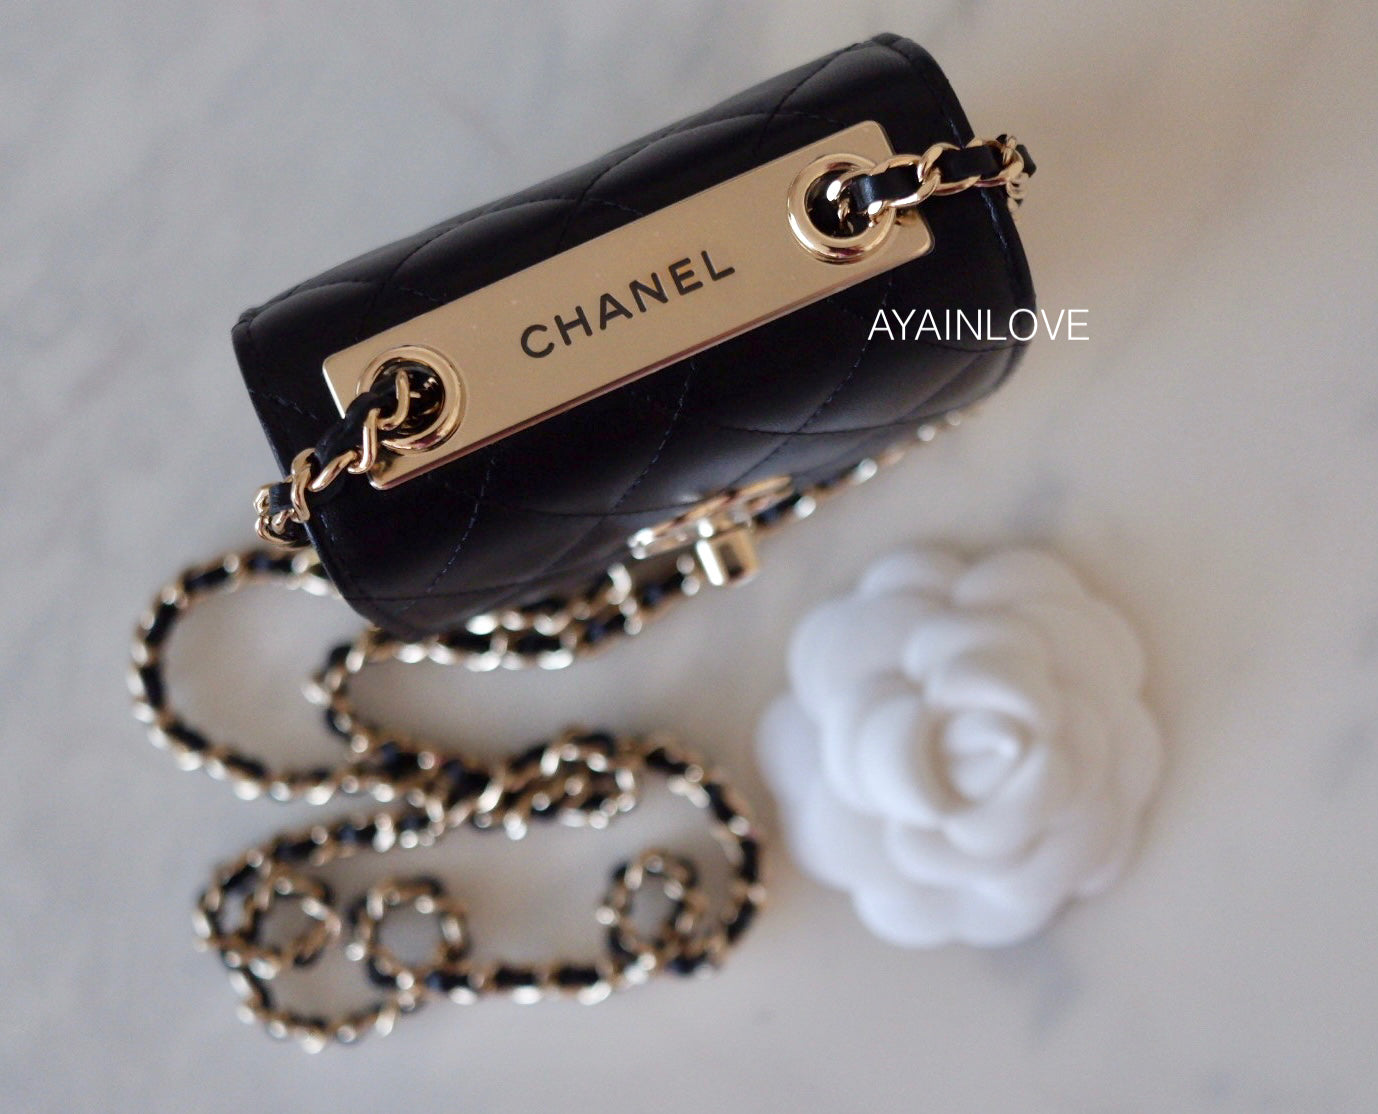 BLACK SMALL TRENDY CC CLUTCH ON CHAIN IN LAMB SKIN AND LIGHT GOLD